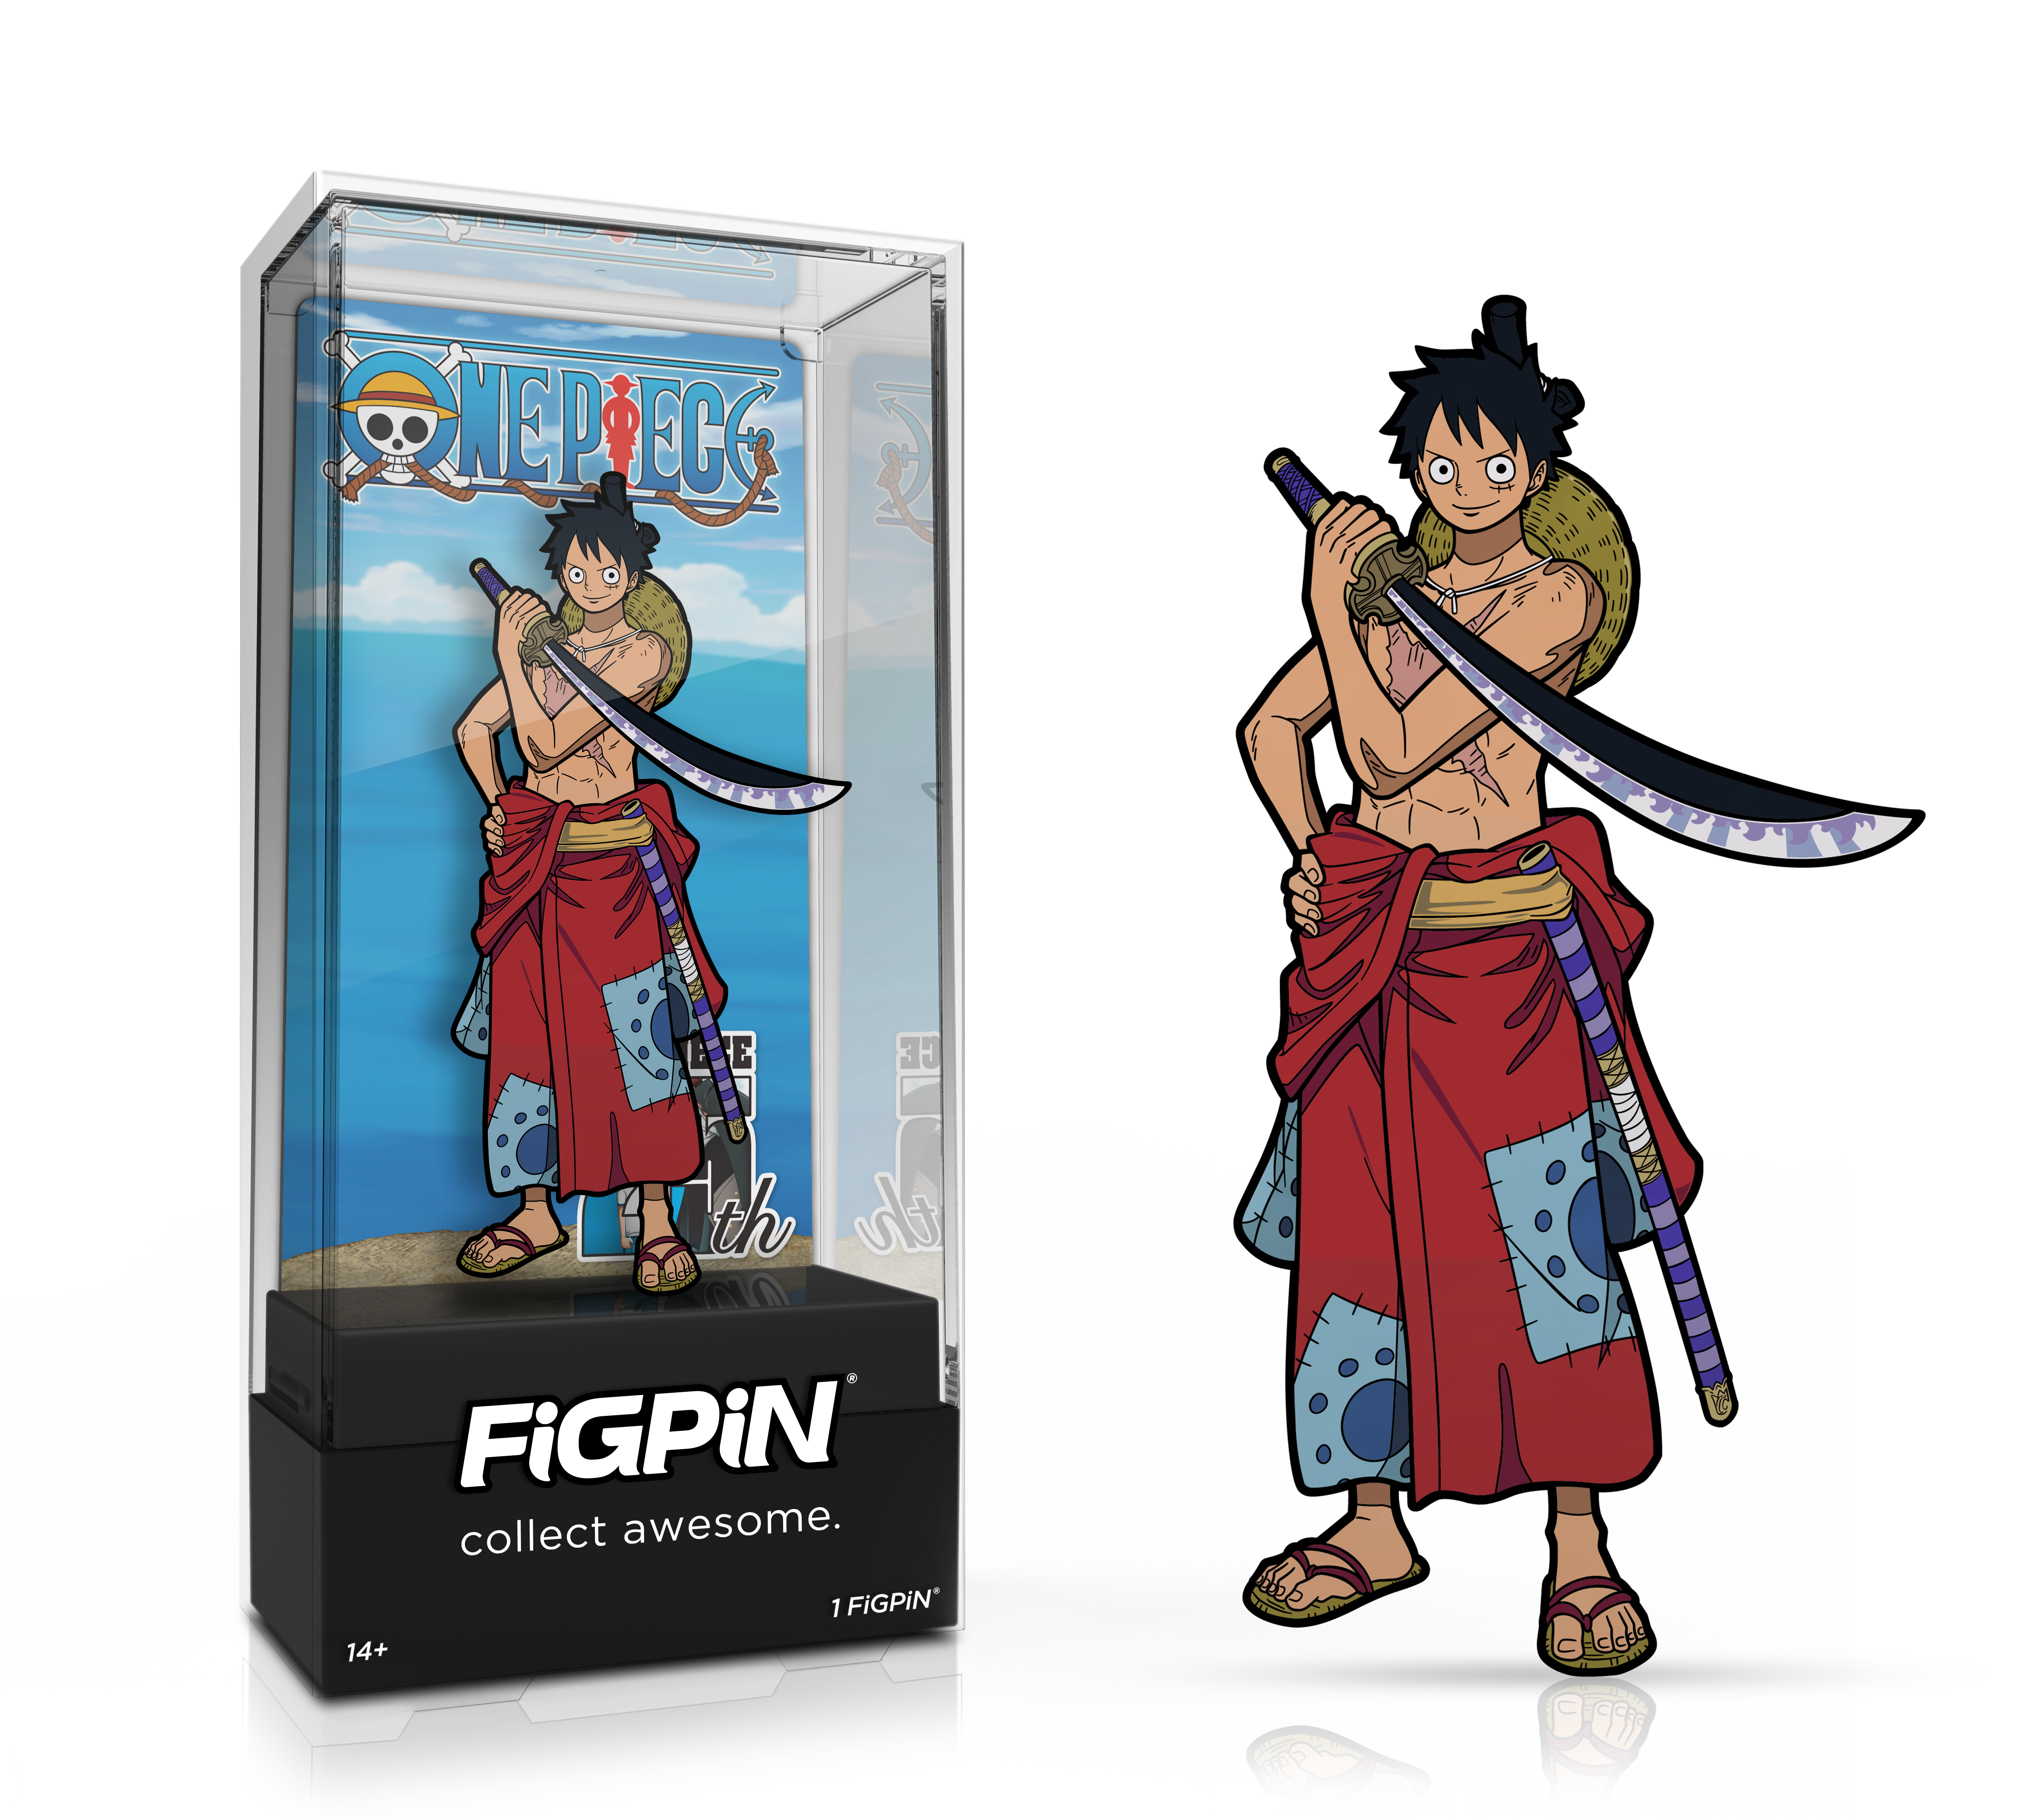 Side by side view of the Luffytaro enamel pin in display case and the art render.